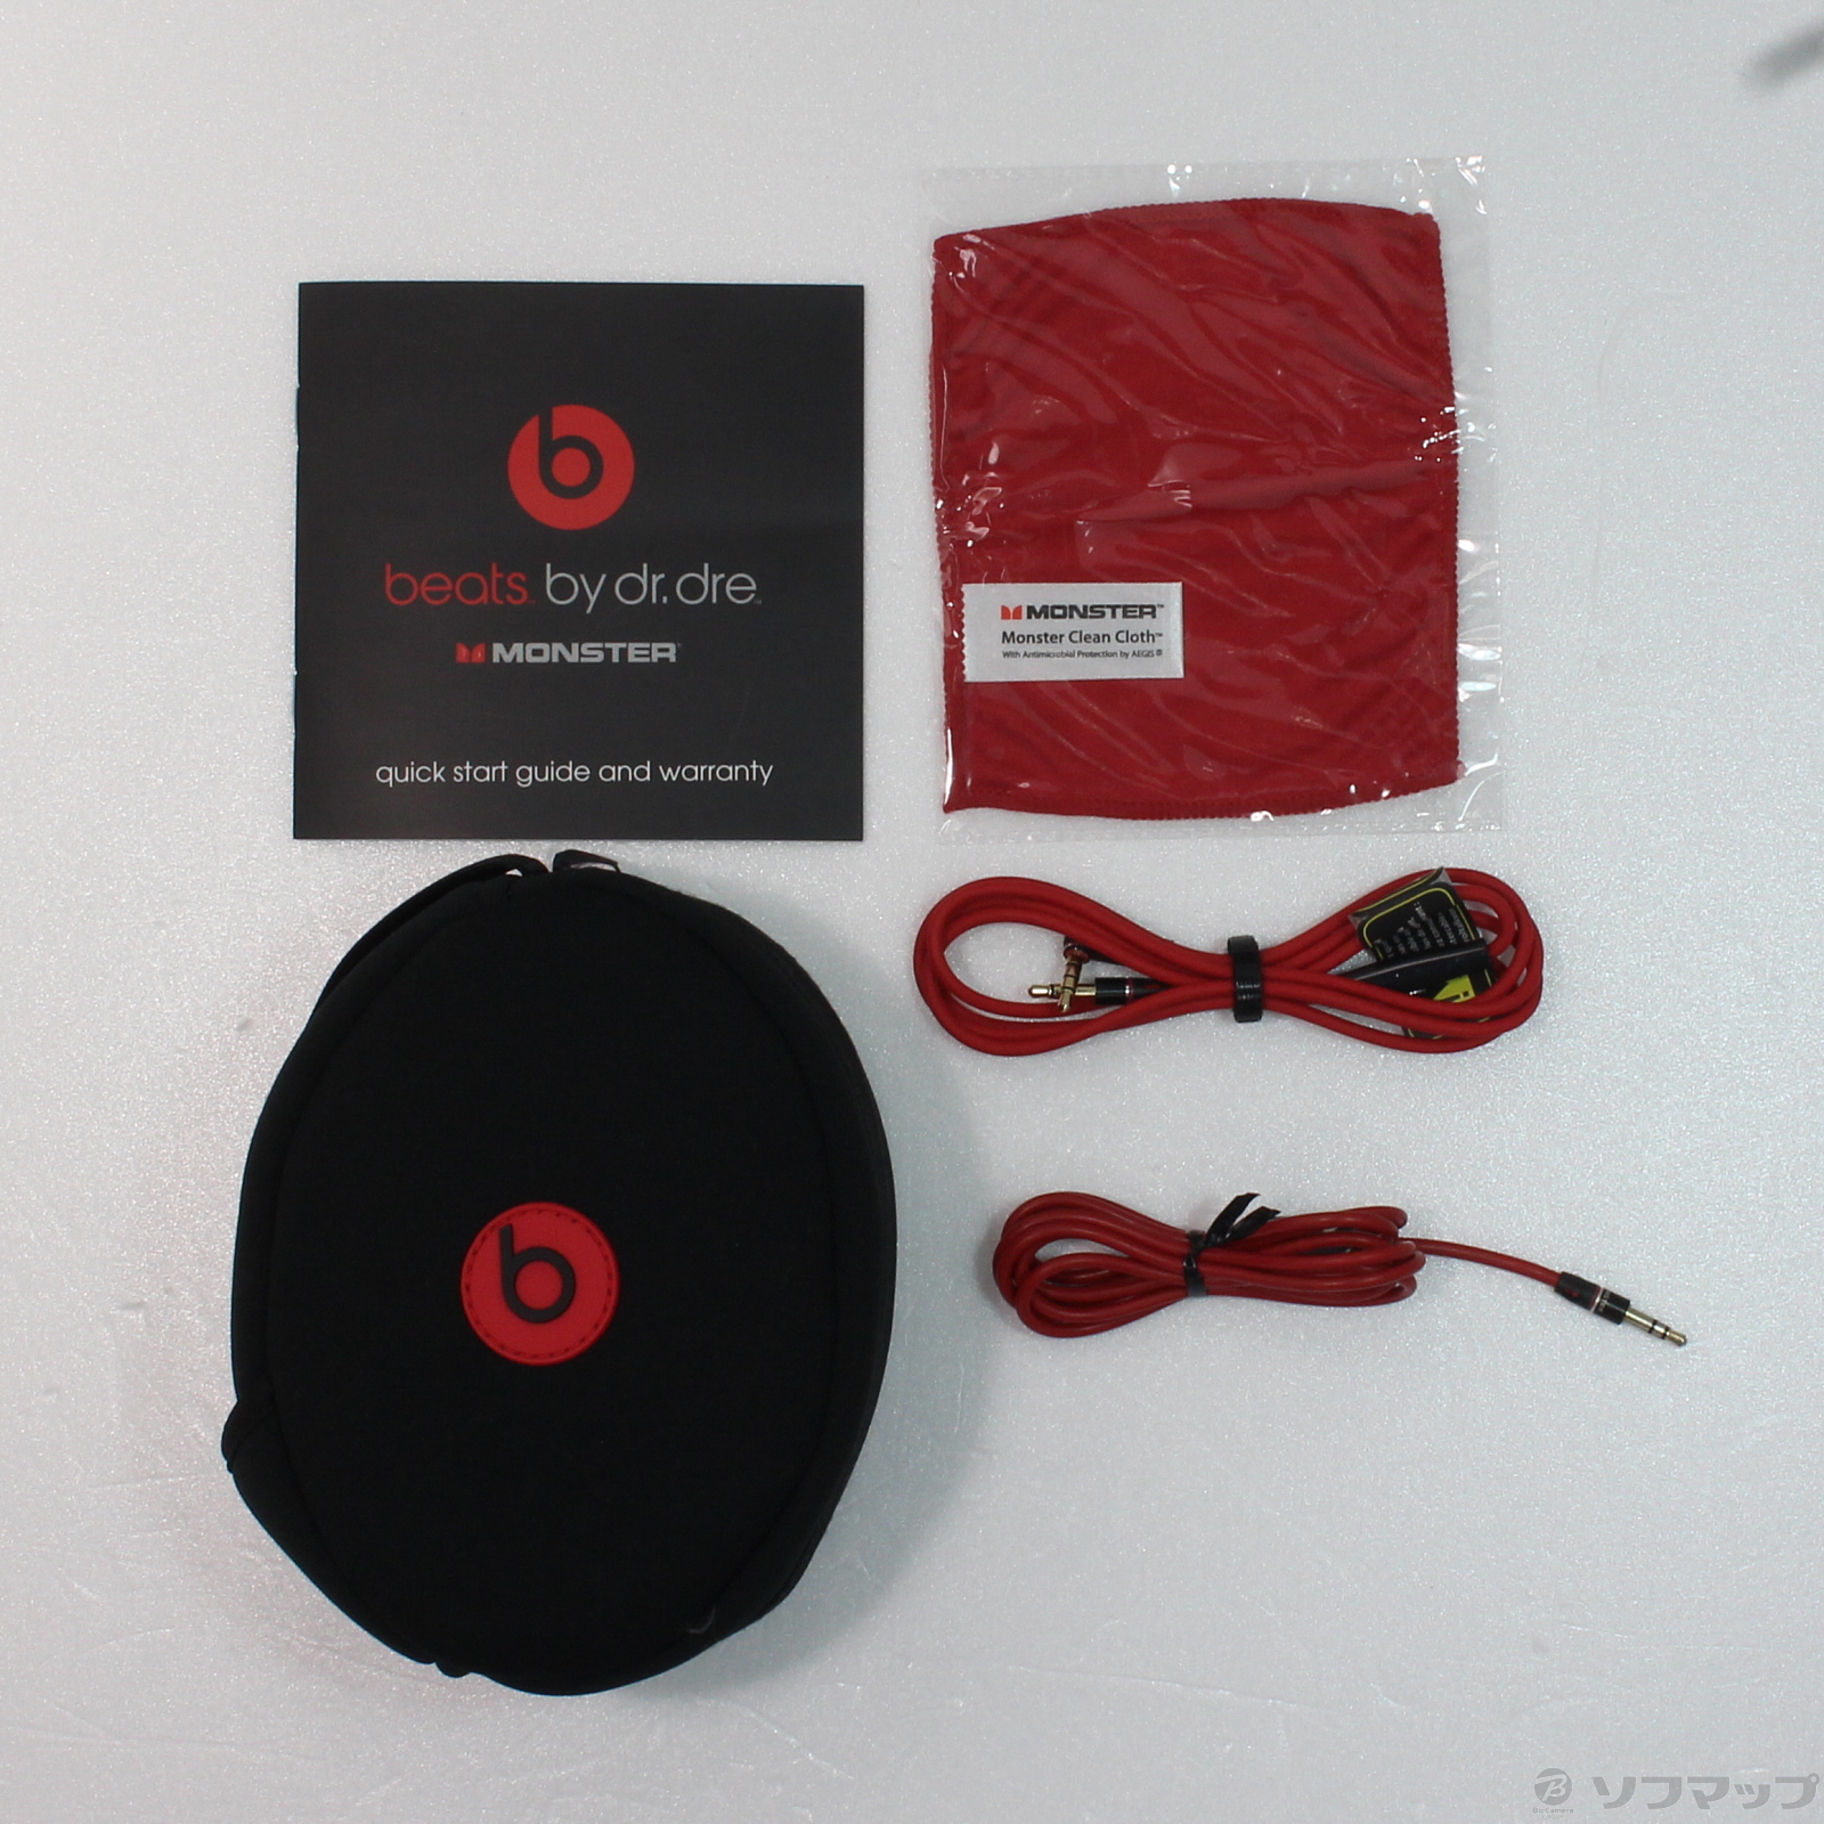 egyptisk sovende Hold op 中古】beats by dr.dre Solo HD オンイヤーヘッドフォン Red [2133043005027] -  リコレ！|ソフマップの中古通販サイト